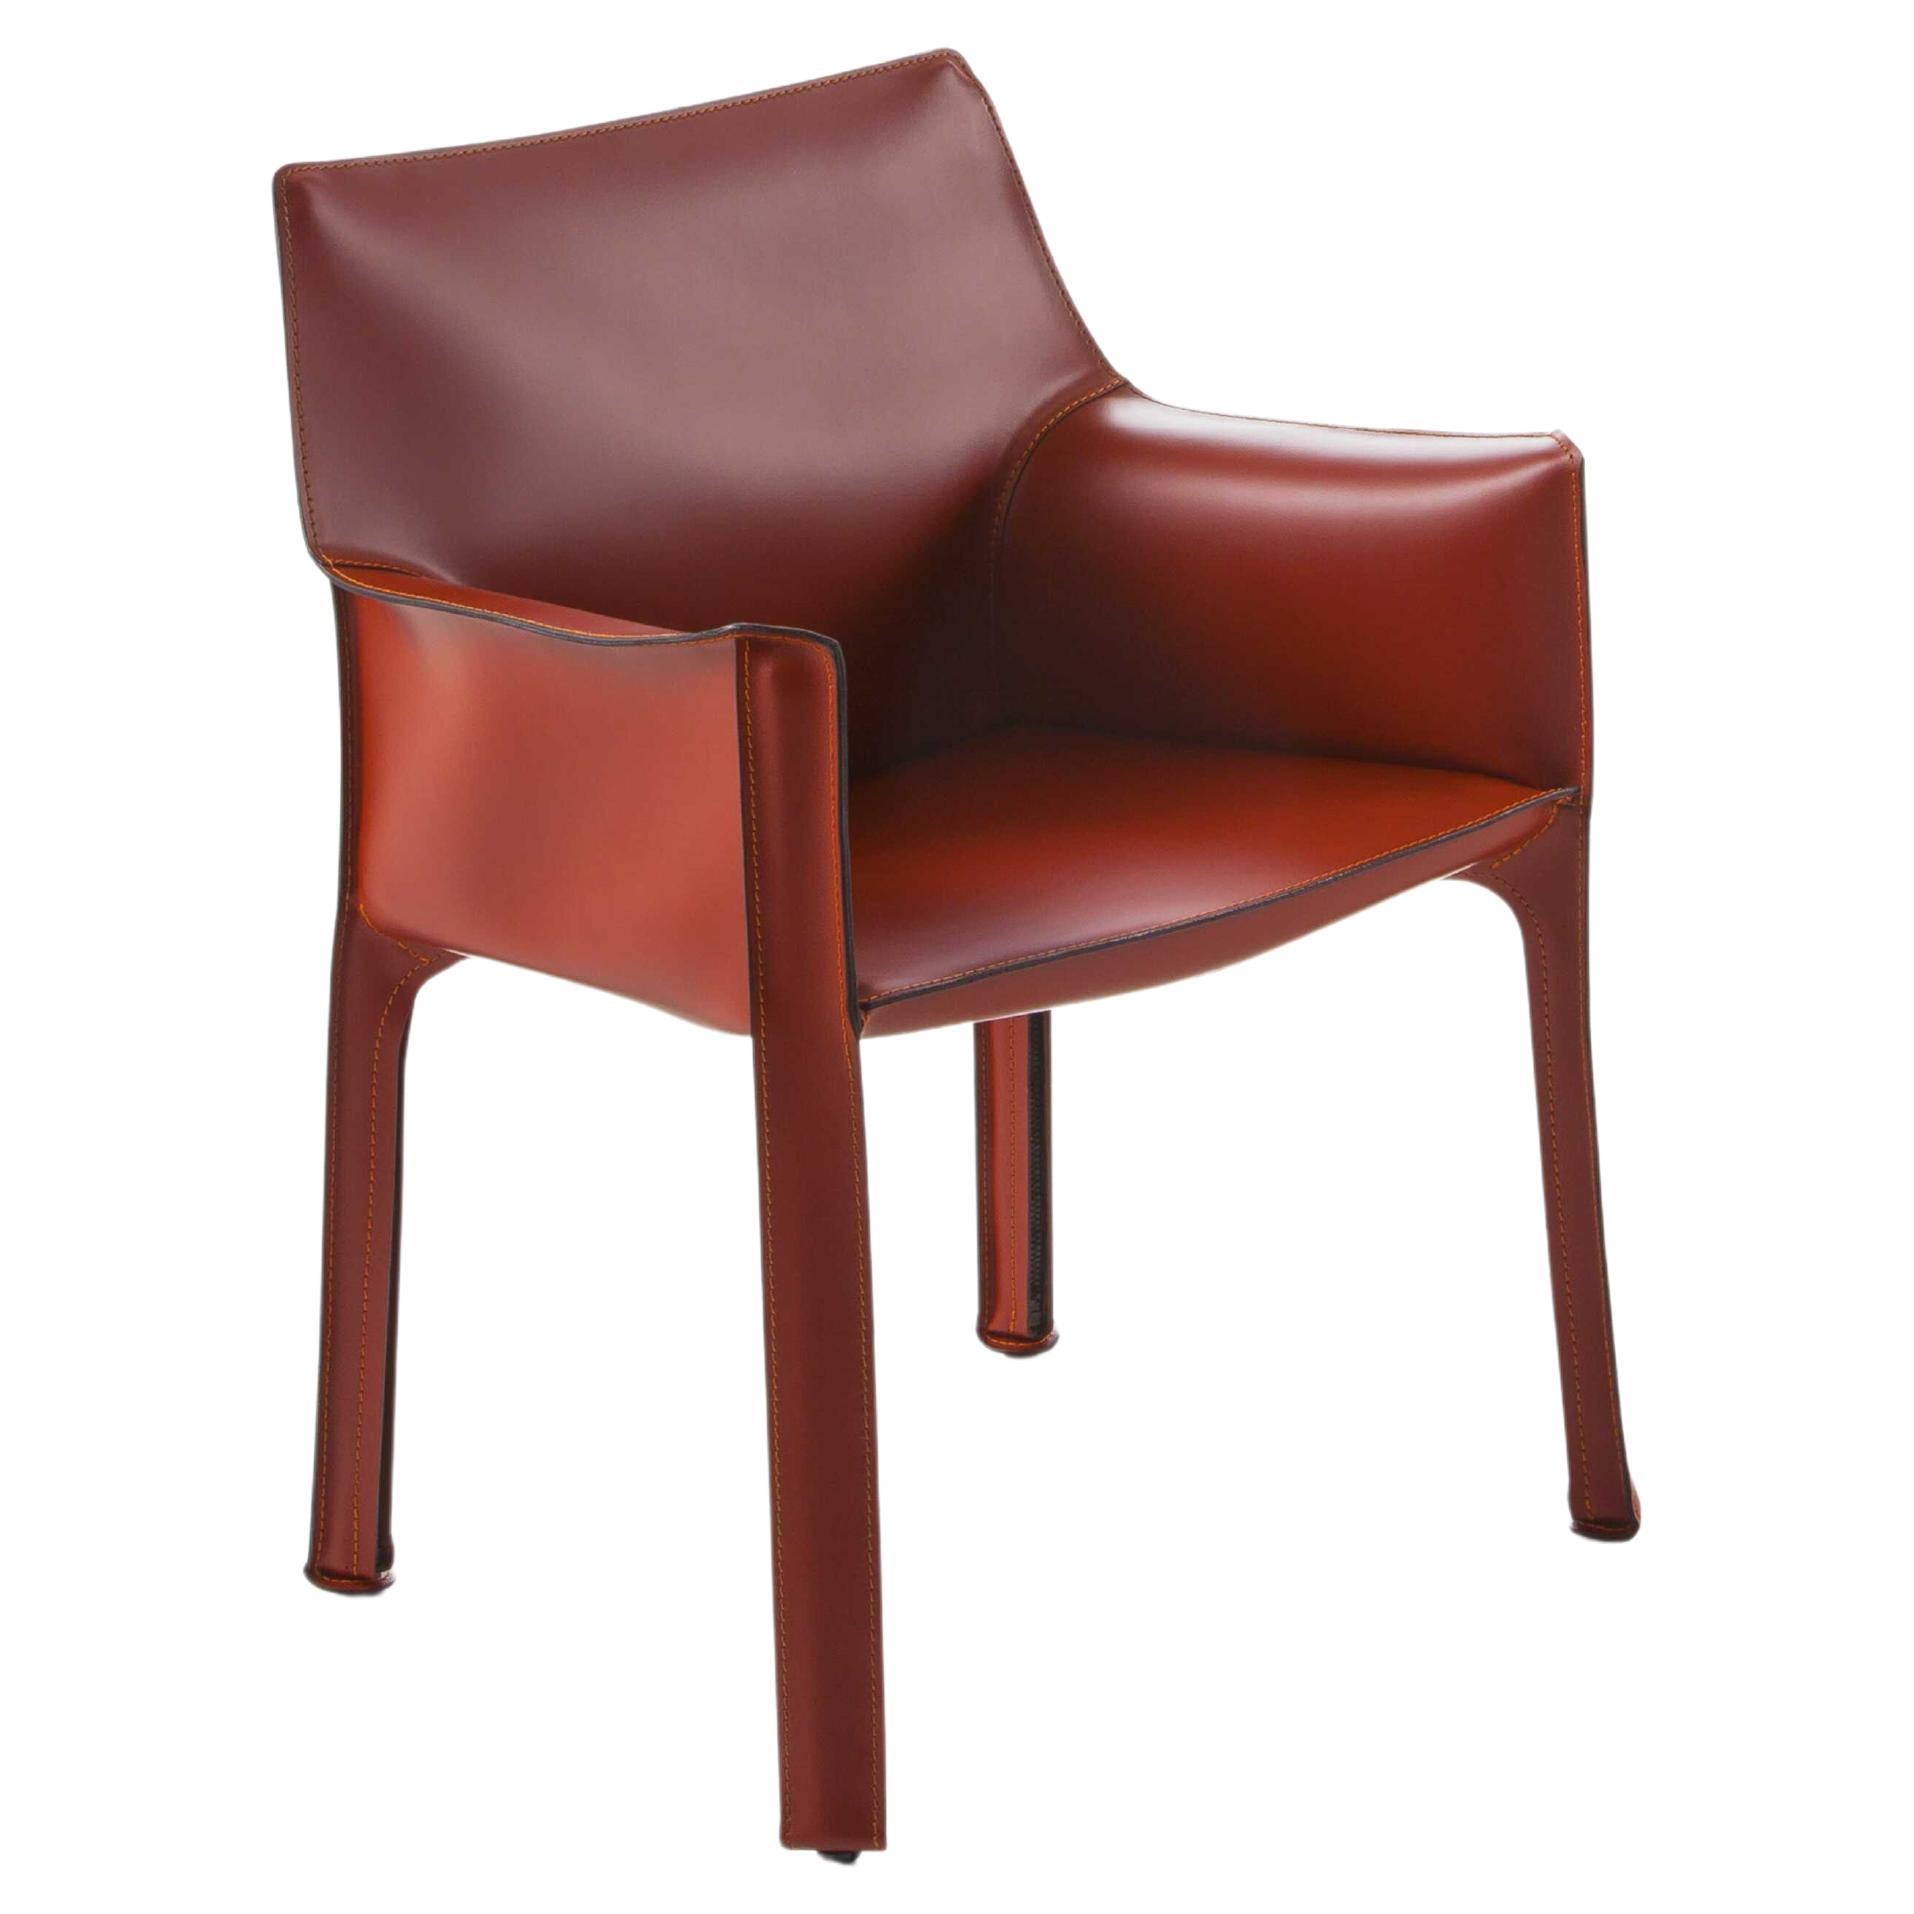 Mario Bellini Cab 413 cowhide leather armchair for Cassina, Italy - new